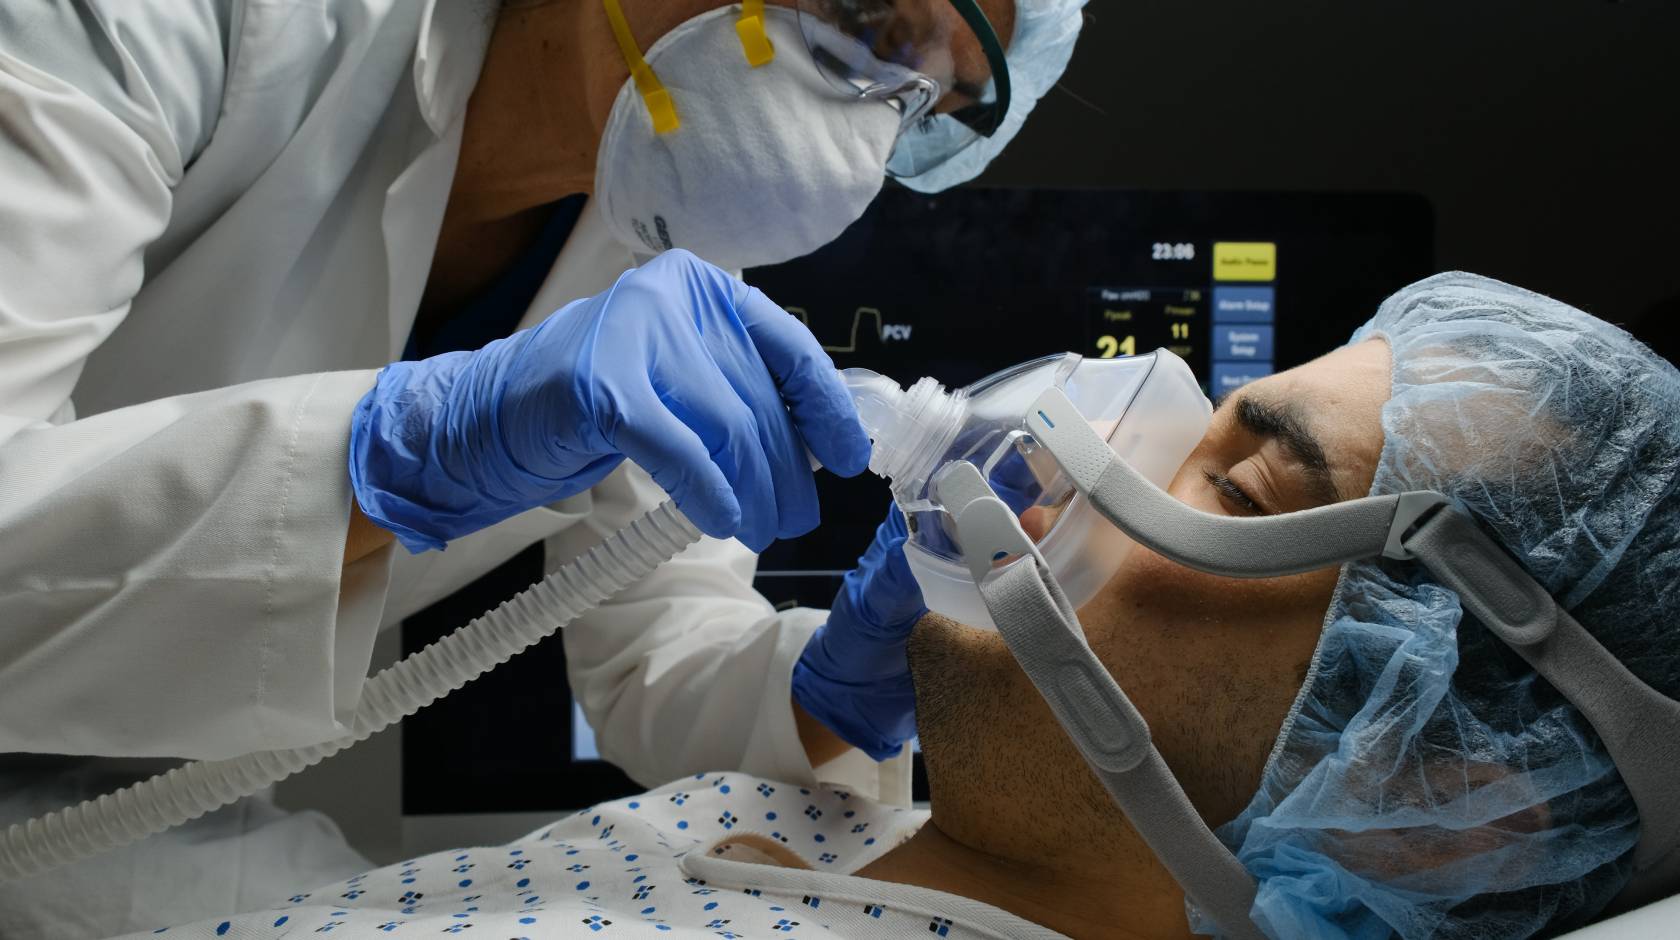 A COVID-19 patient on a ventilator being checked by a doctor